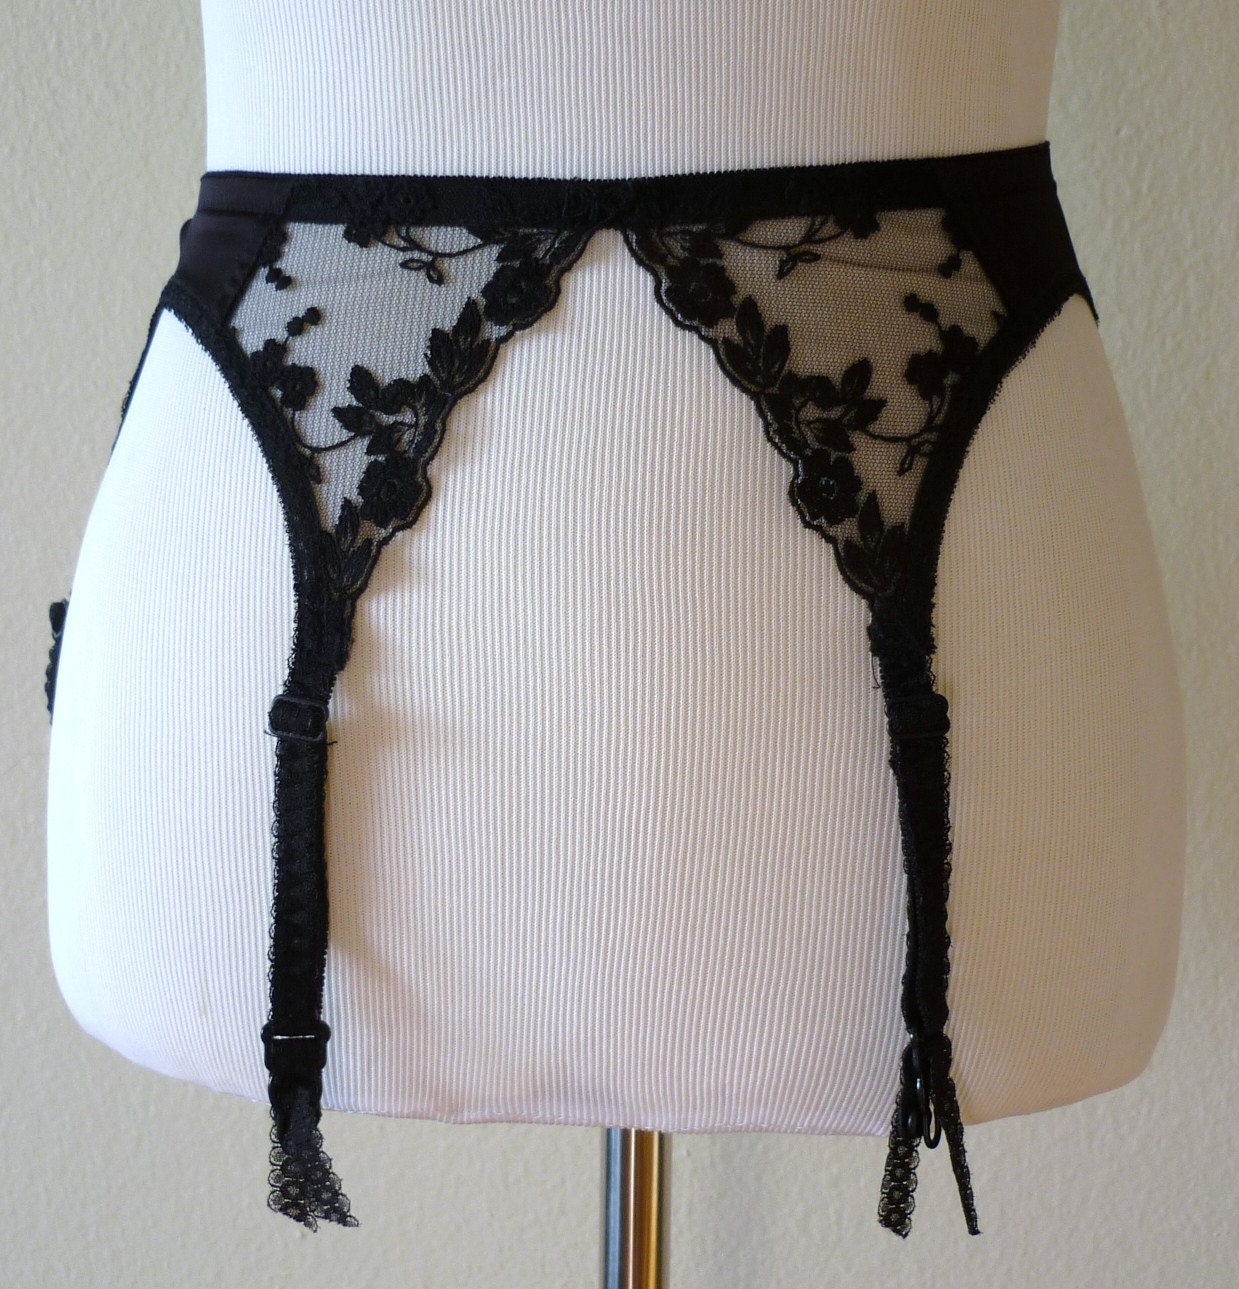 Sexy 1980's Christian Dior Black Lace Garter Belt in sz S